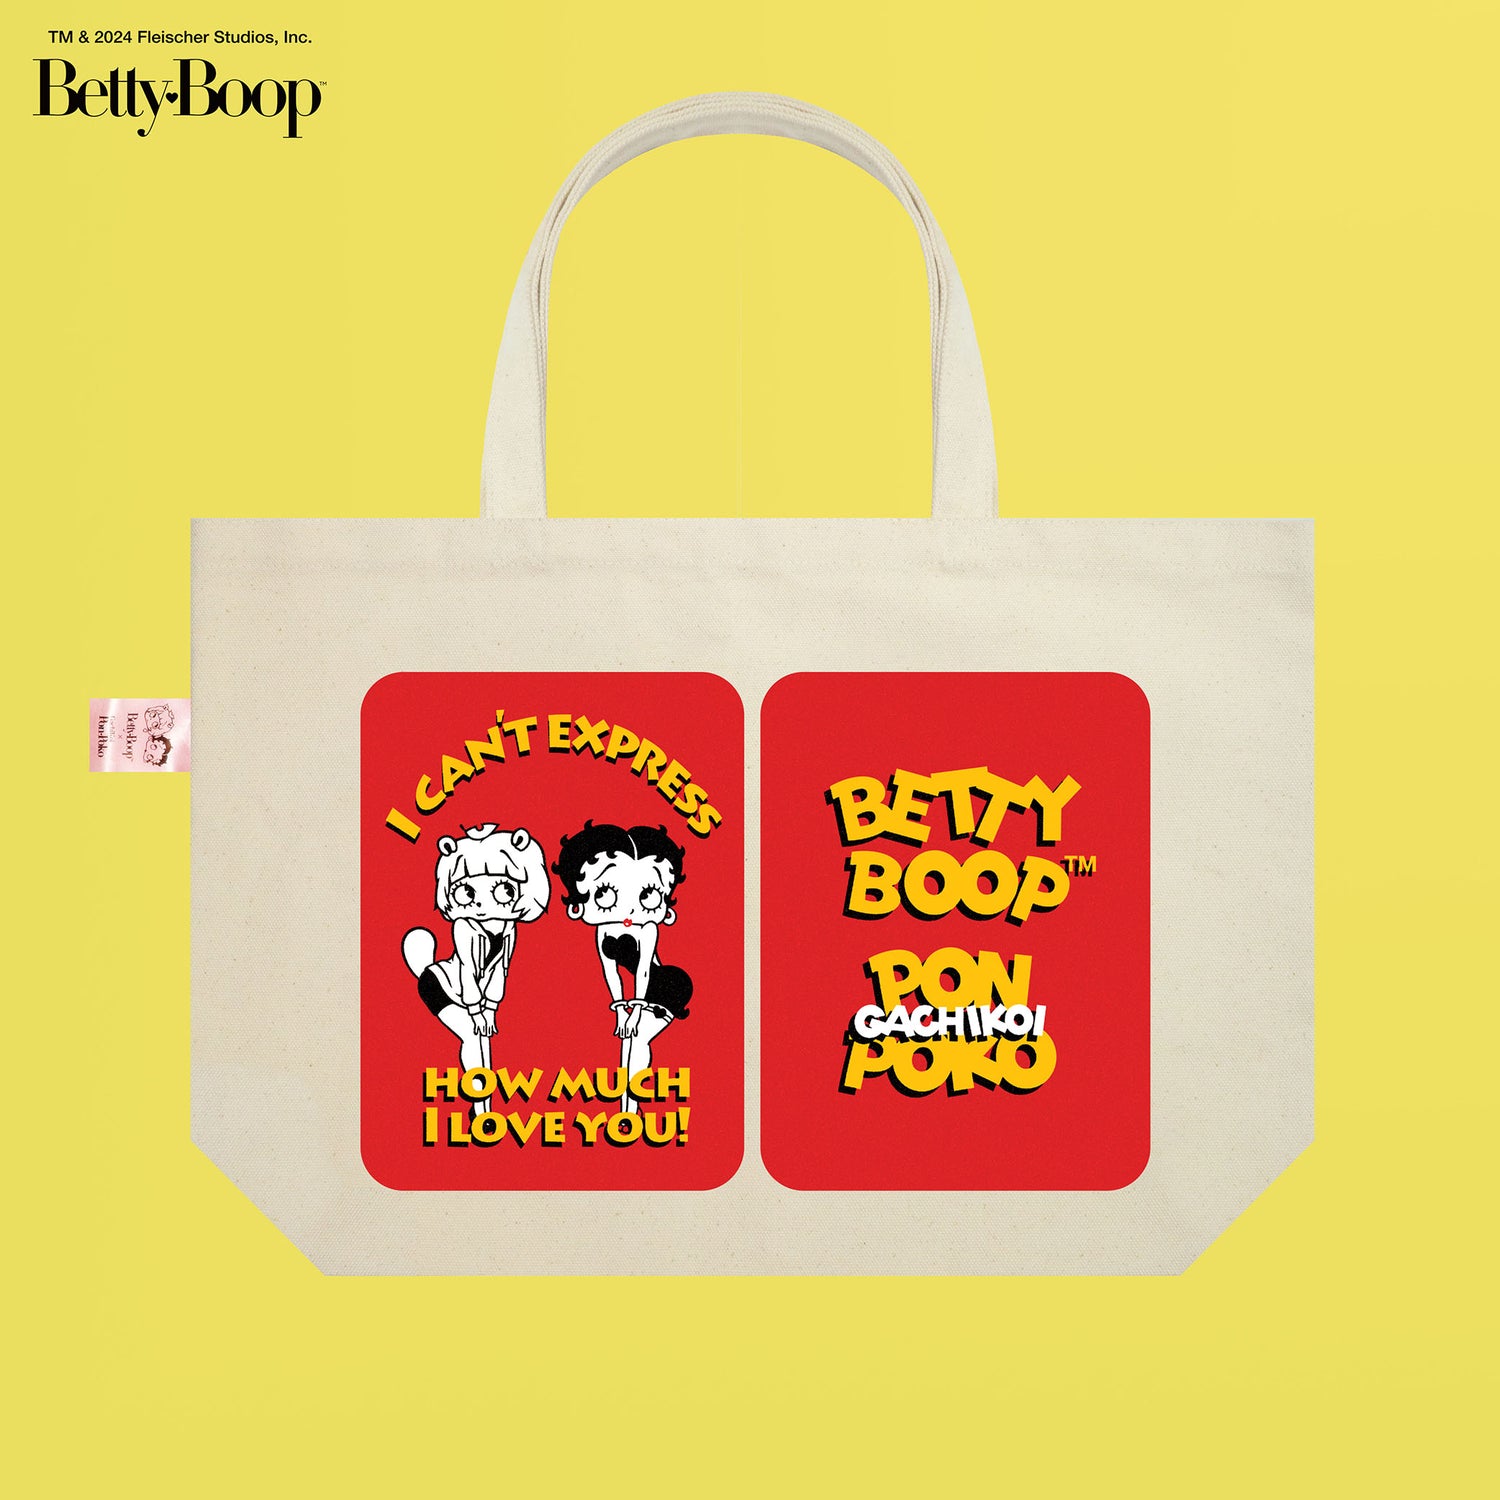 【POKOPEA　Collaboration】BETTY BOOP™ x ガチ恋ぽんぽこ Poster Graphics Canvas To